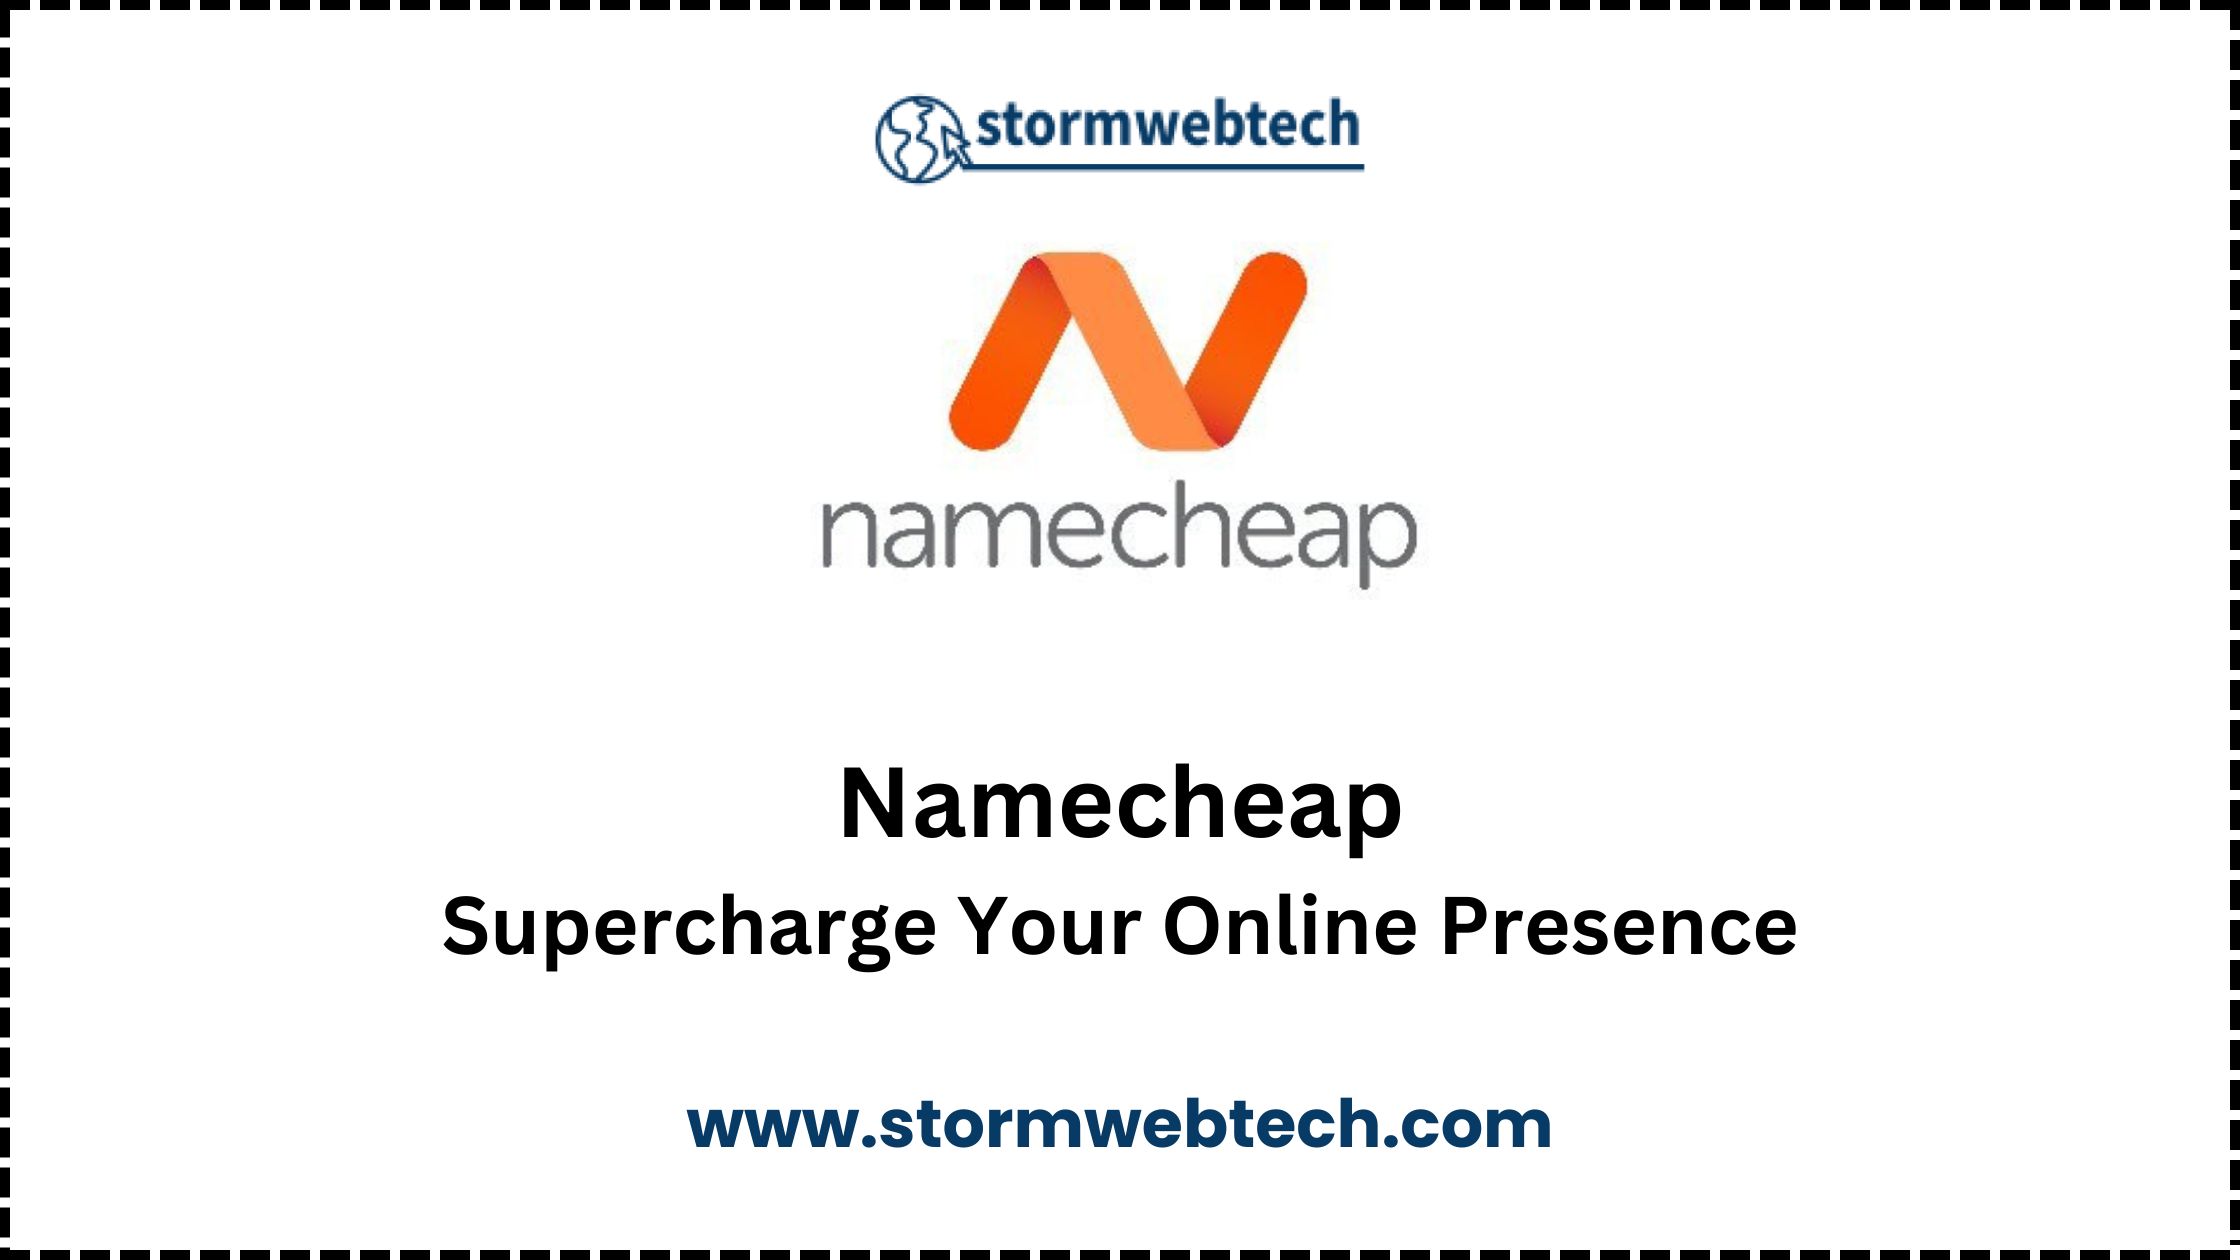 supercharge your online presence with namecheap, Namecheap.com offers a wide range of domain registration, hosting, online security services